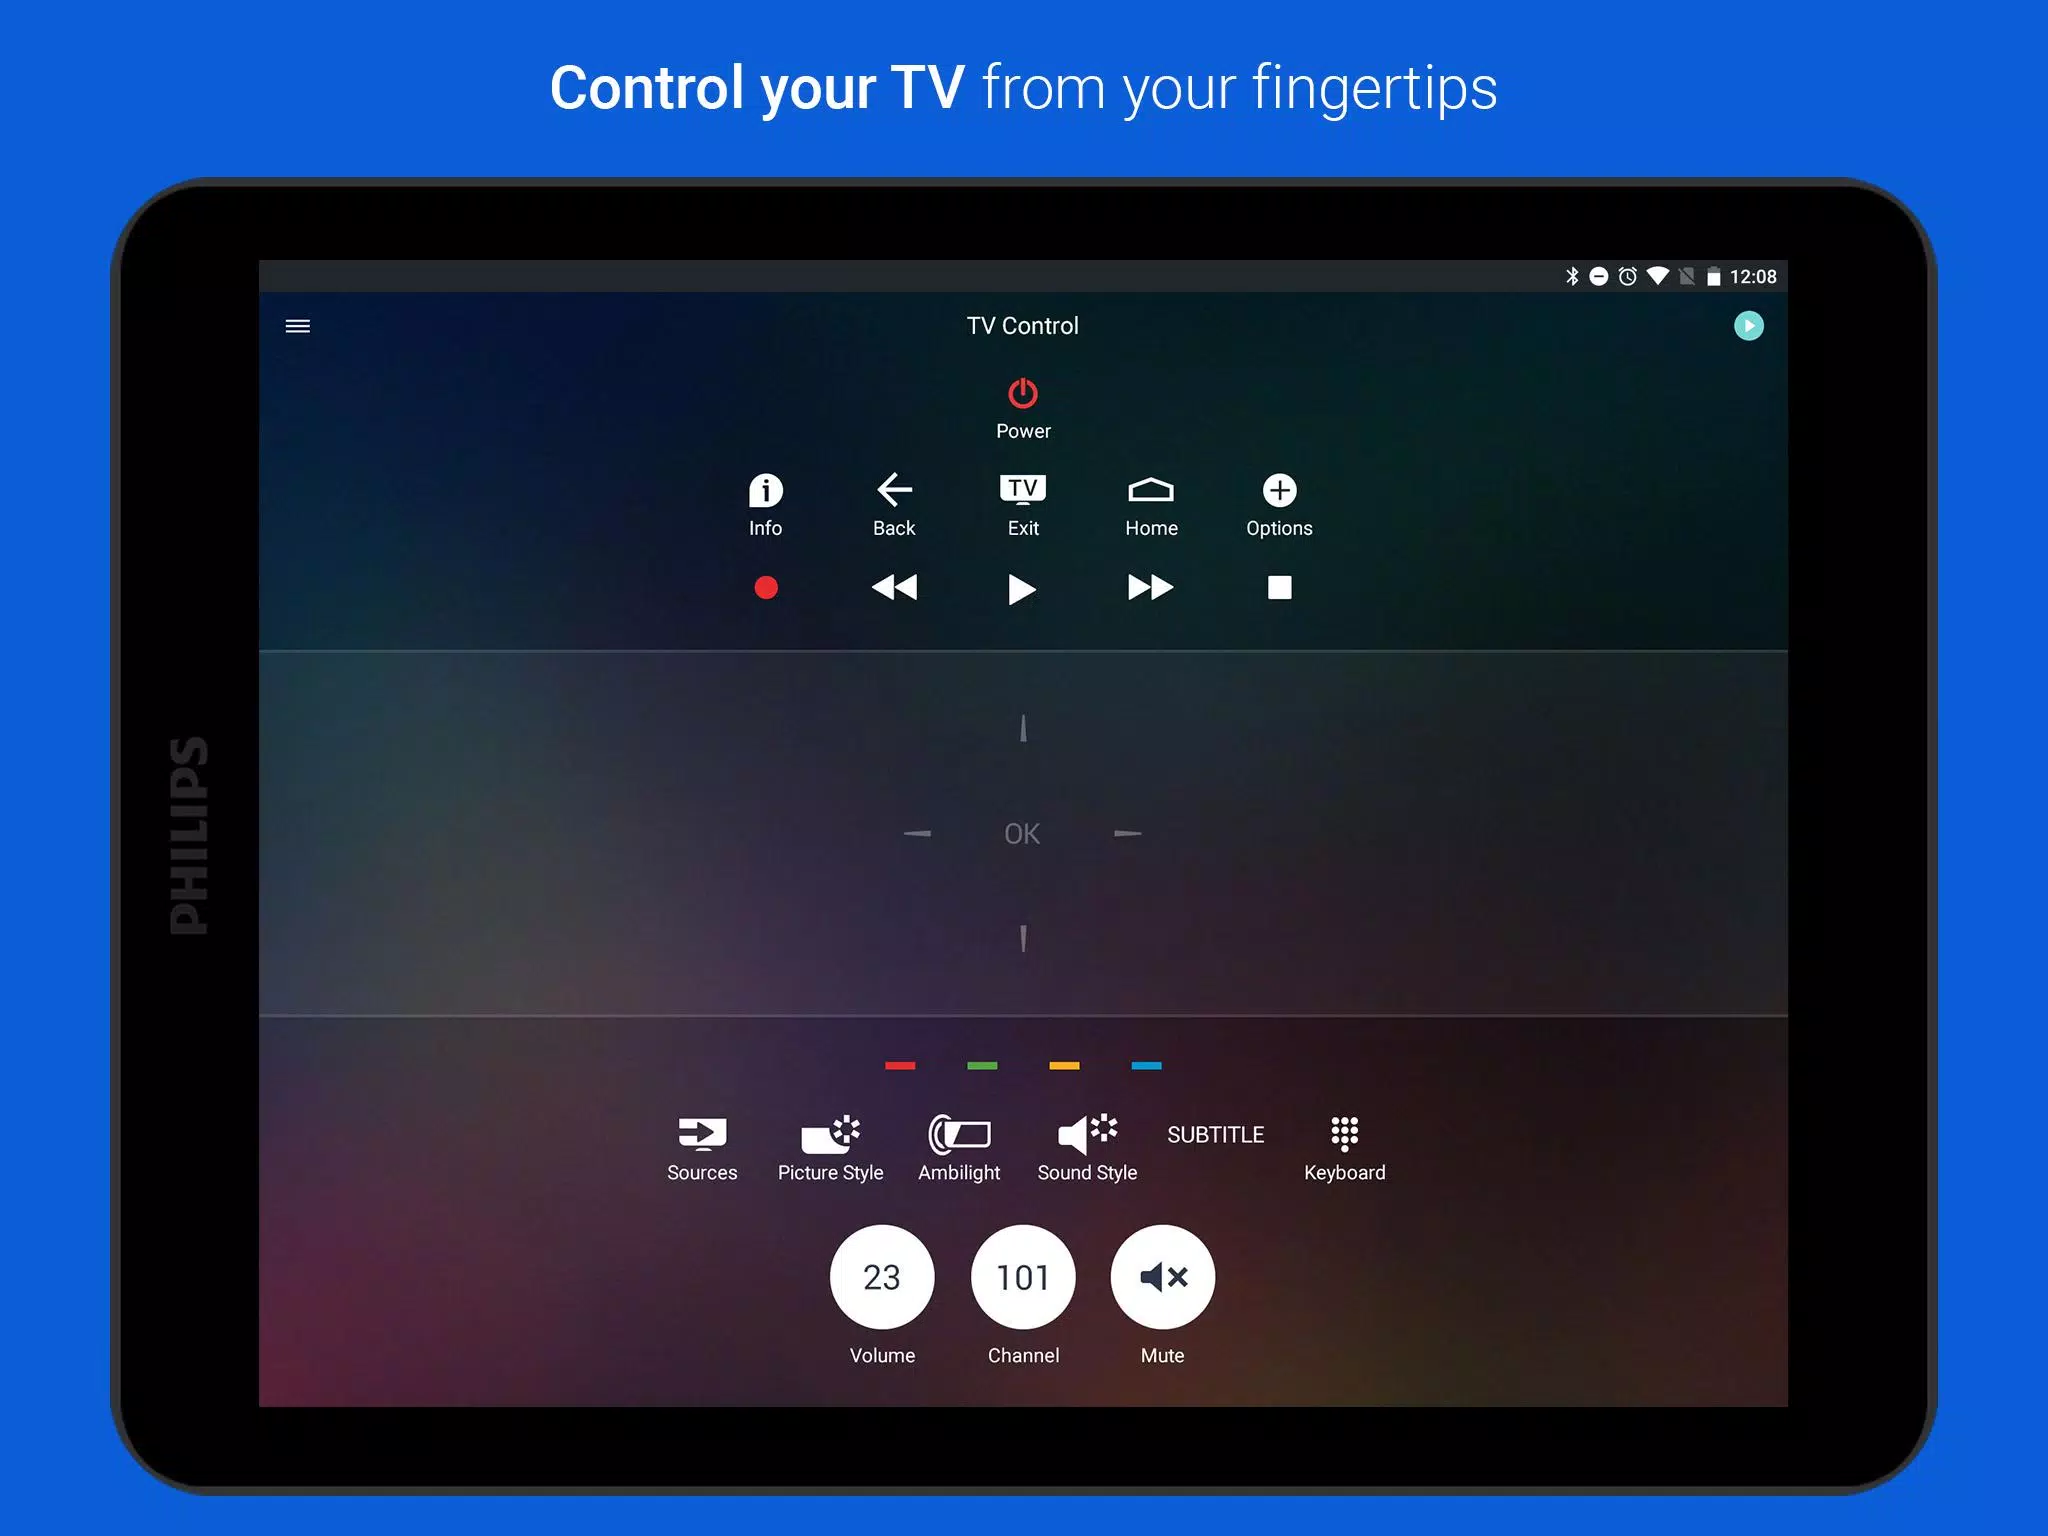 Philips TV Remote APK for Android Download